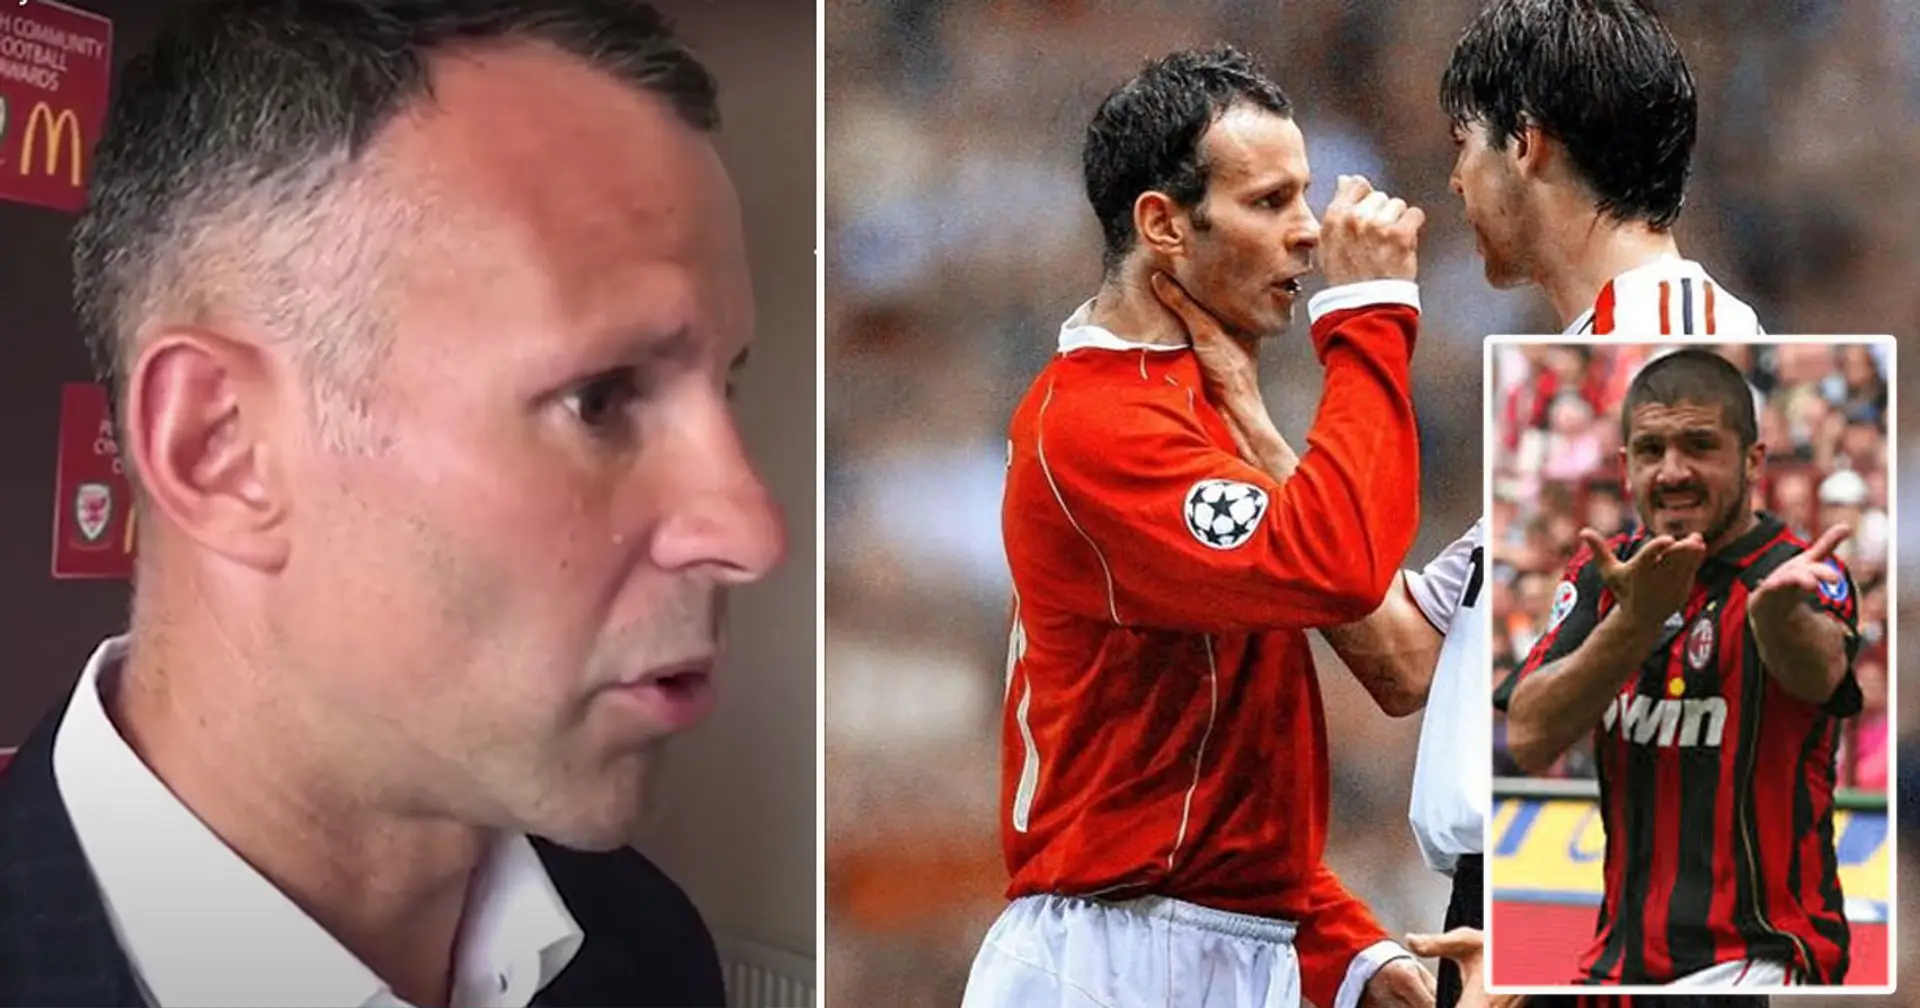 'He was waiting for me with Gattuso': Giggs tells a story behind iconic Kaka bust-up photo